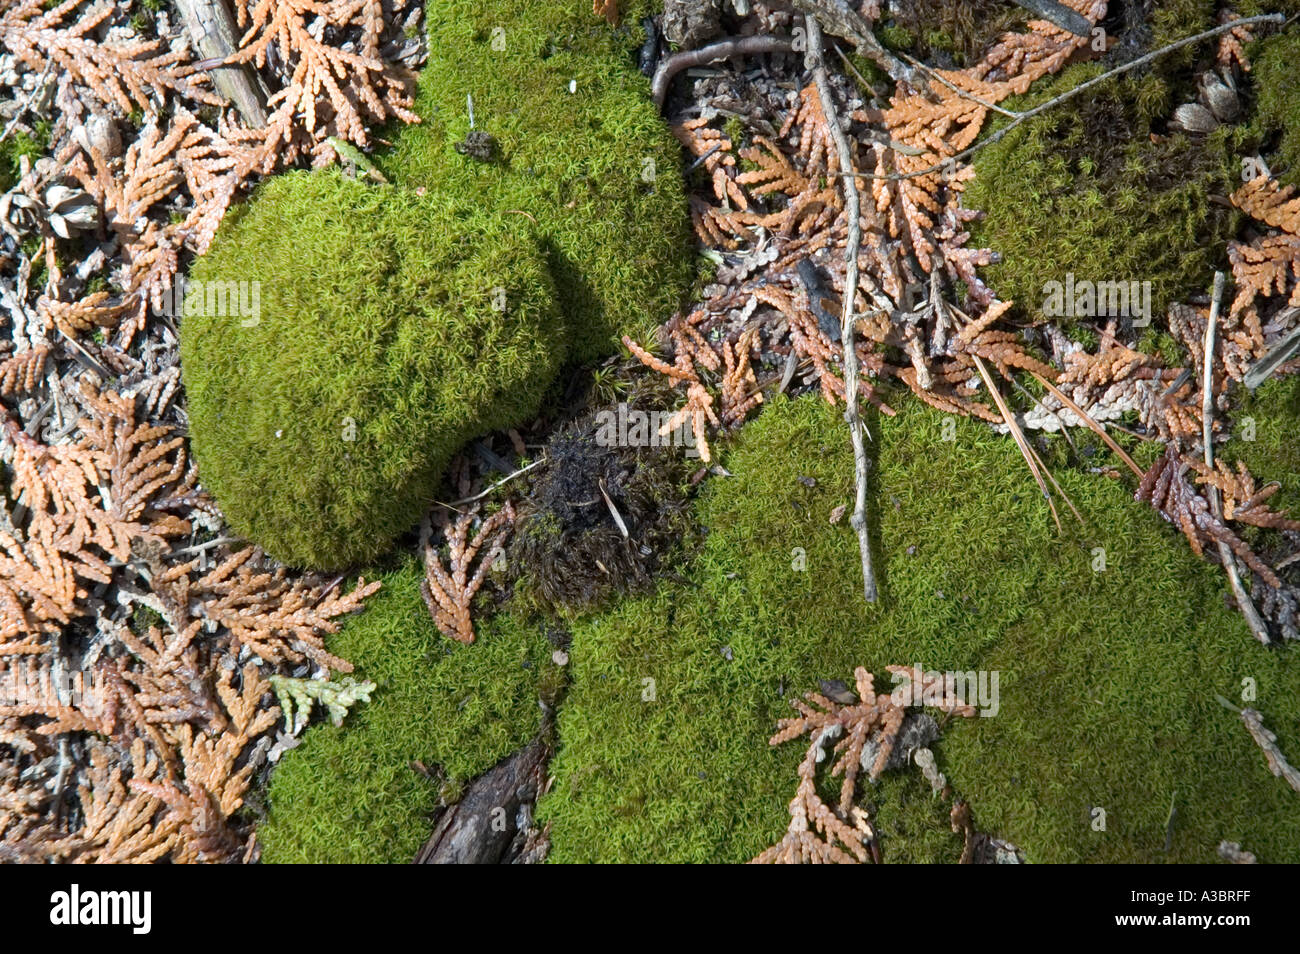 Moss growing on the forest floor surrounded by dead cedar leaves Stock Photo